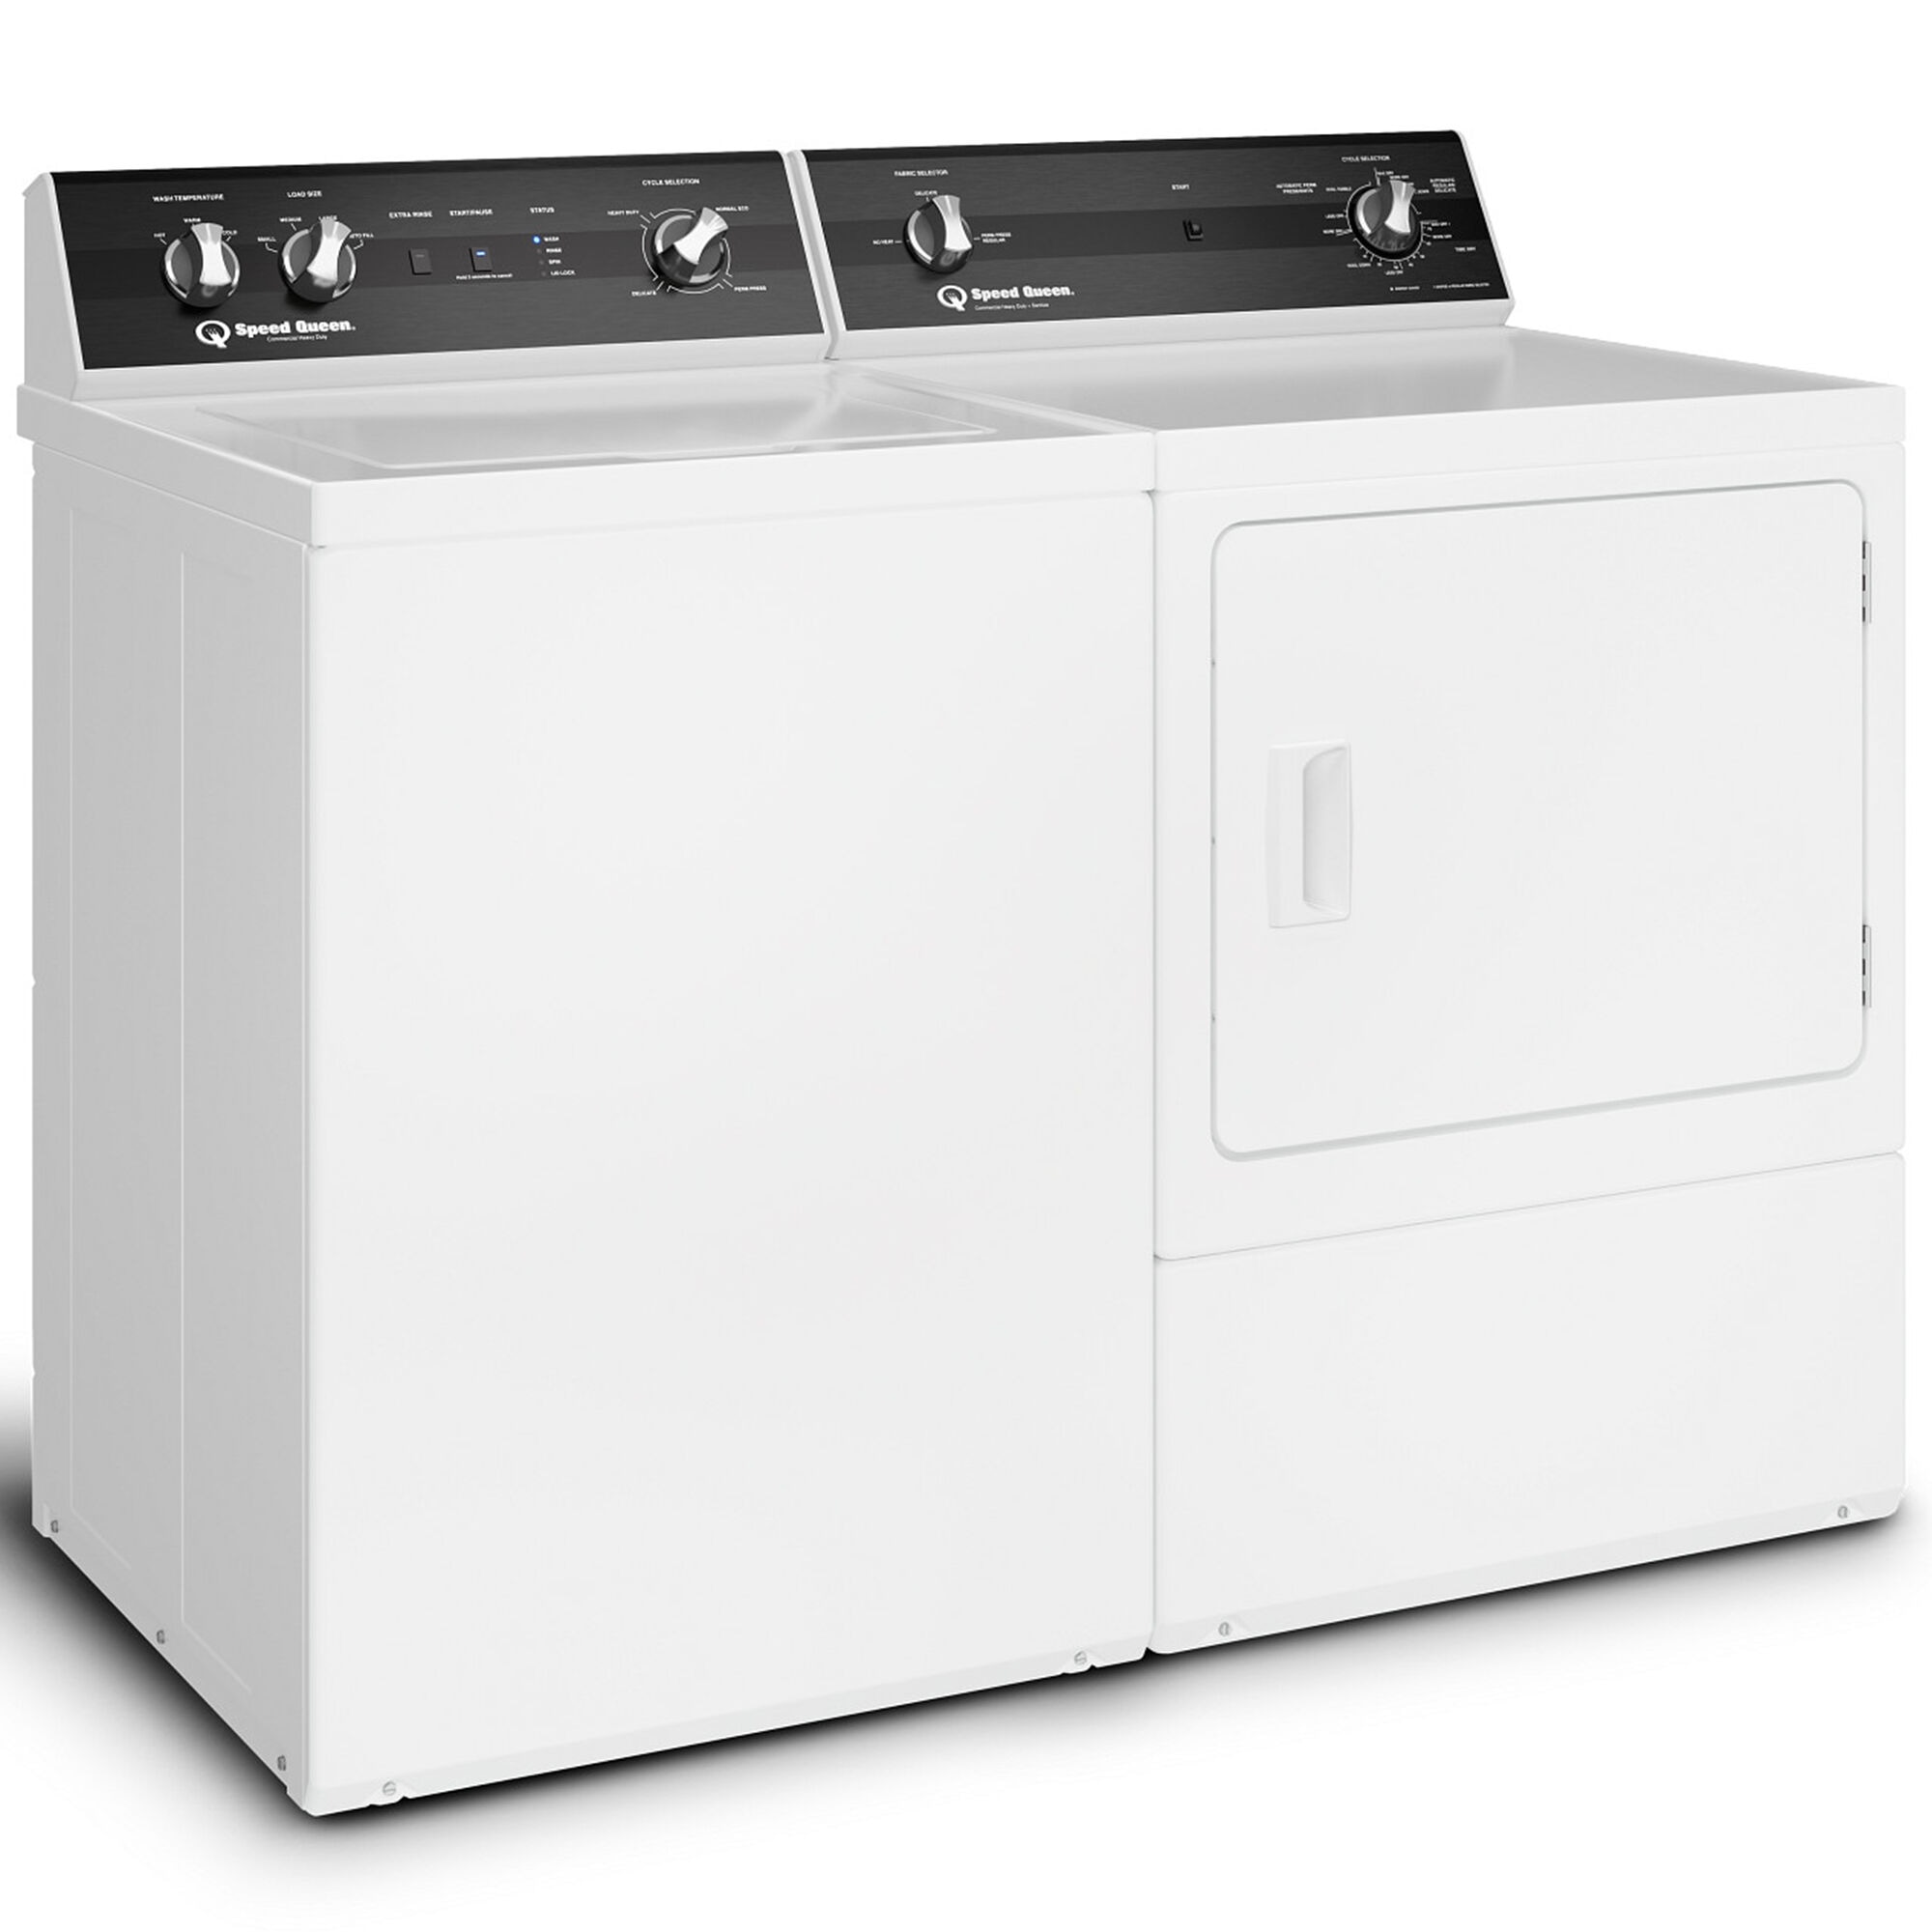 Speed Queen TR3 26 in. 3.2 cu. ft. Top Load Washer with Agitator 